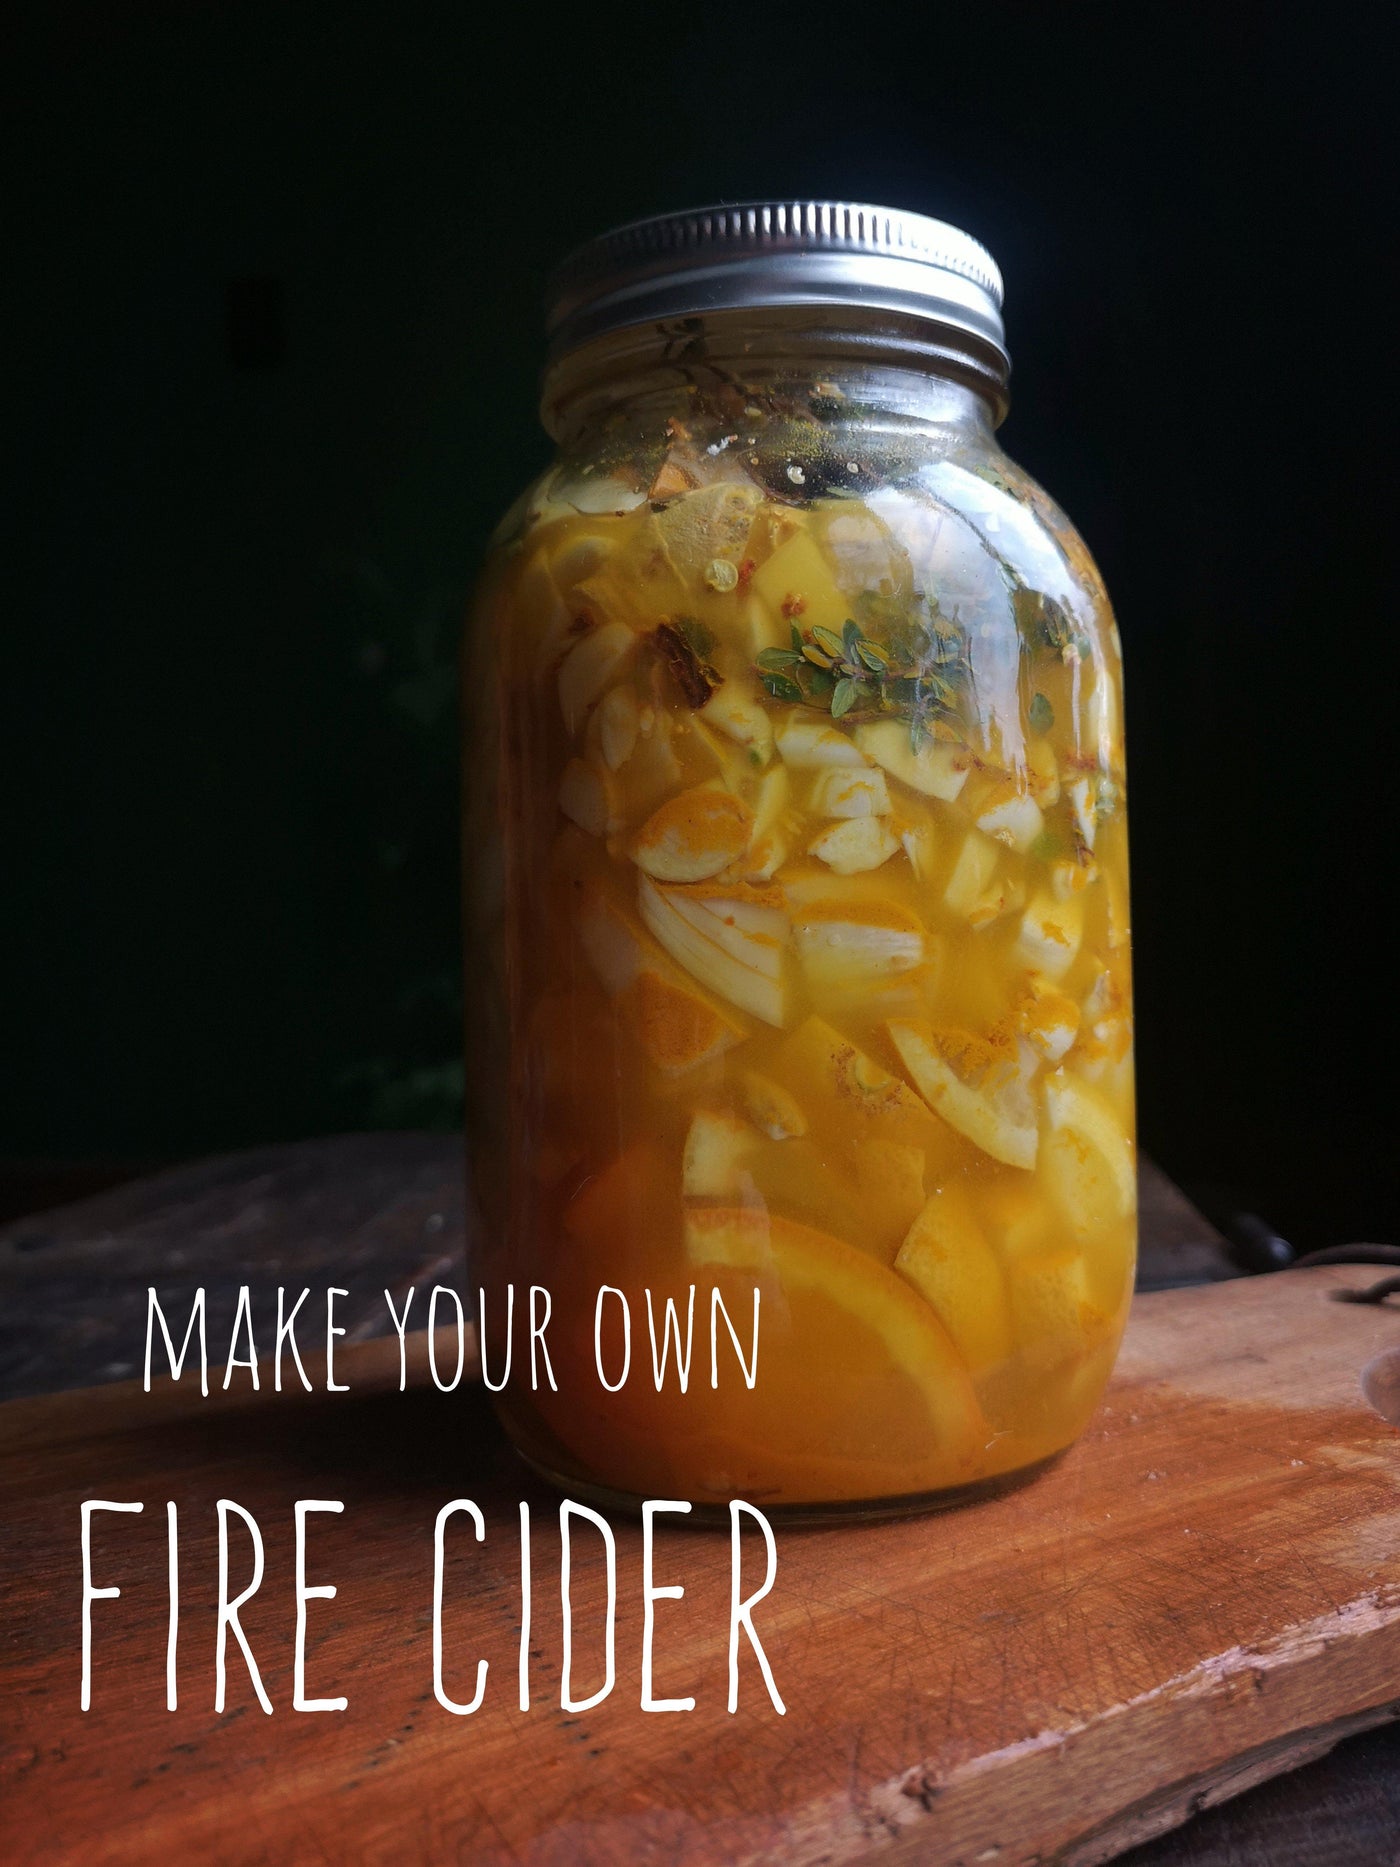 Make Your Own Fire Cider - Hammerthreads